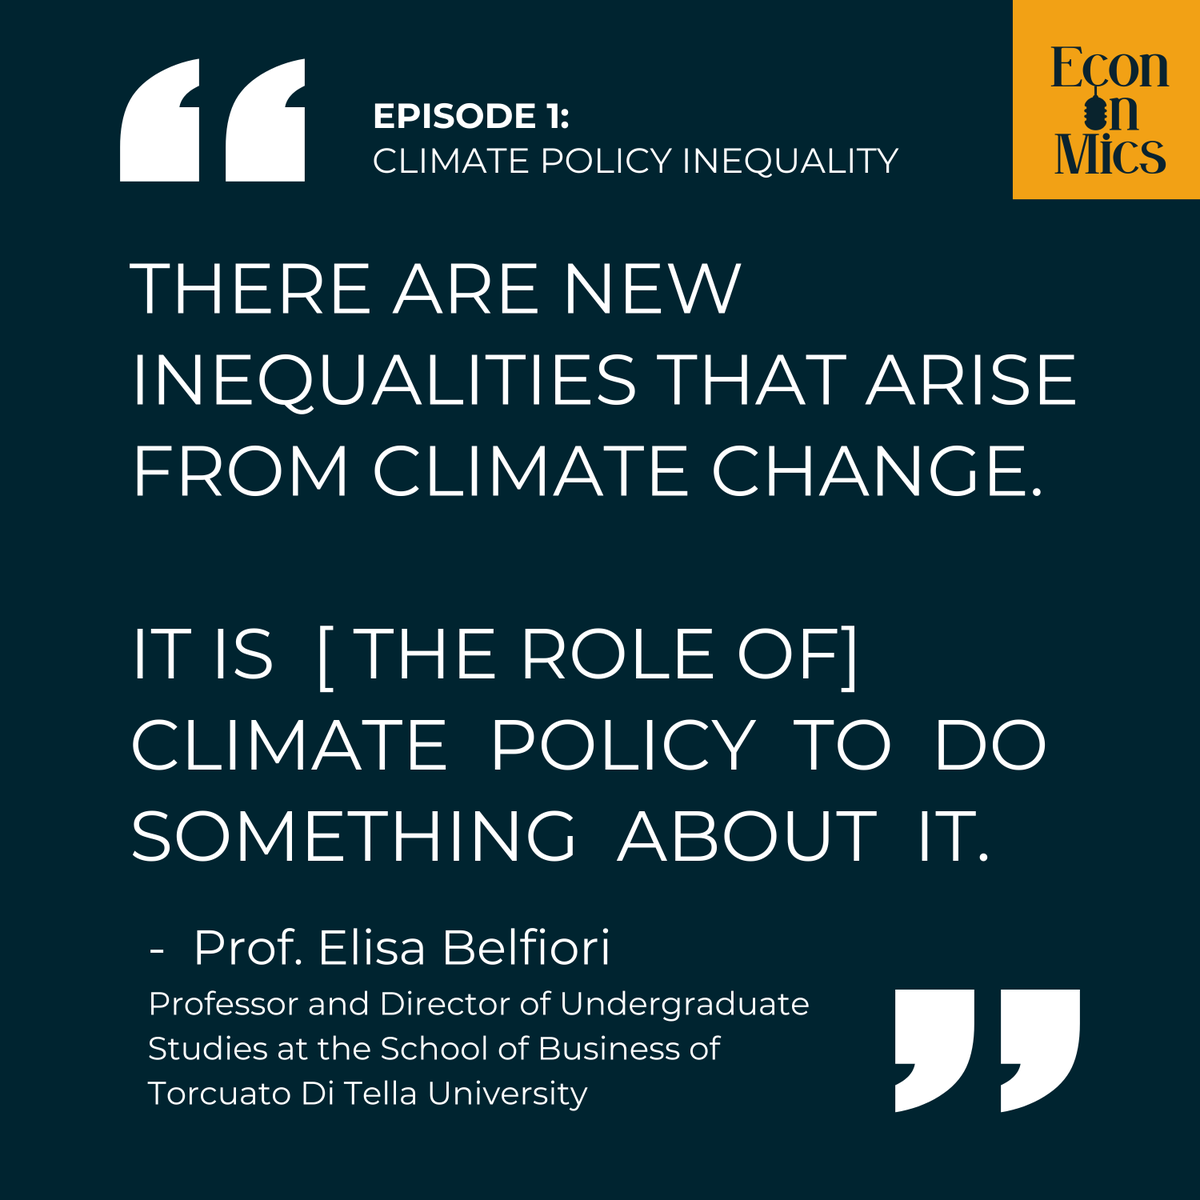 📢Episode 1 of 🎙️ Econ-on-Mics is LIVE! 

Join the #discussion on 🌎 #Climate #Policy #Inequality with Elisa Belfiori @elisabelfiori, interviewed by Maria Alsina Pujols @MaAlsina 

listen here bit.ly/3Ji1JN9 

#econtwitter #womeninecon #amplifyingvoices